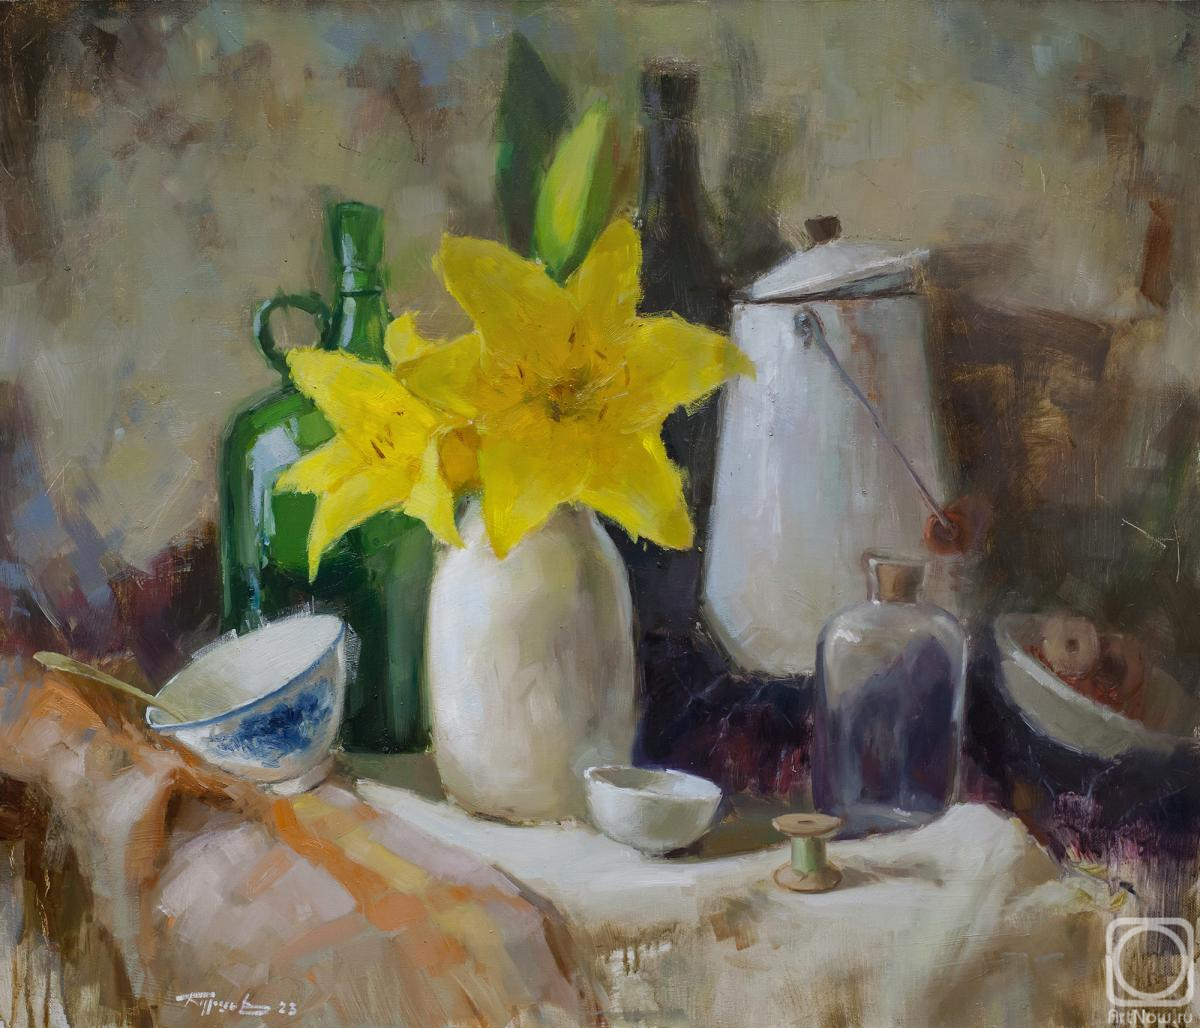 Burtsev Evgeny. Still life with lilies and dishes